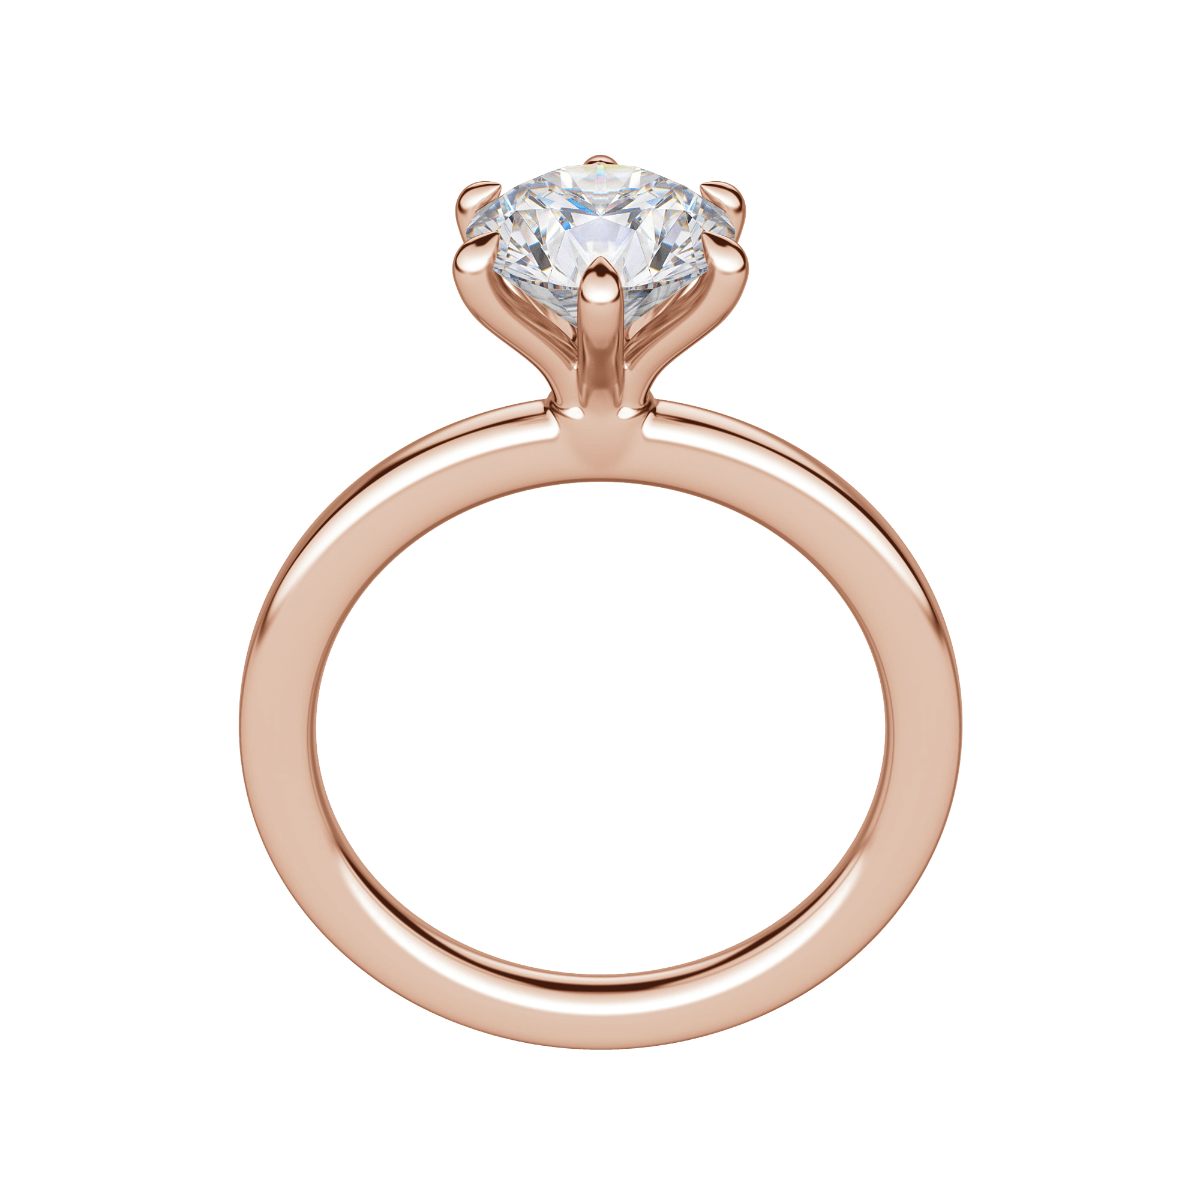 Lyre Classic Round Cut Engagement Ring, Hover, 14k Rose Gold